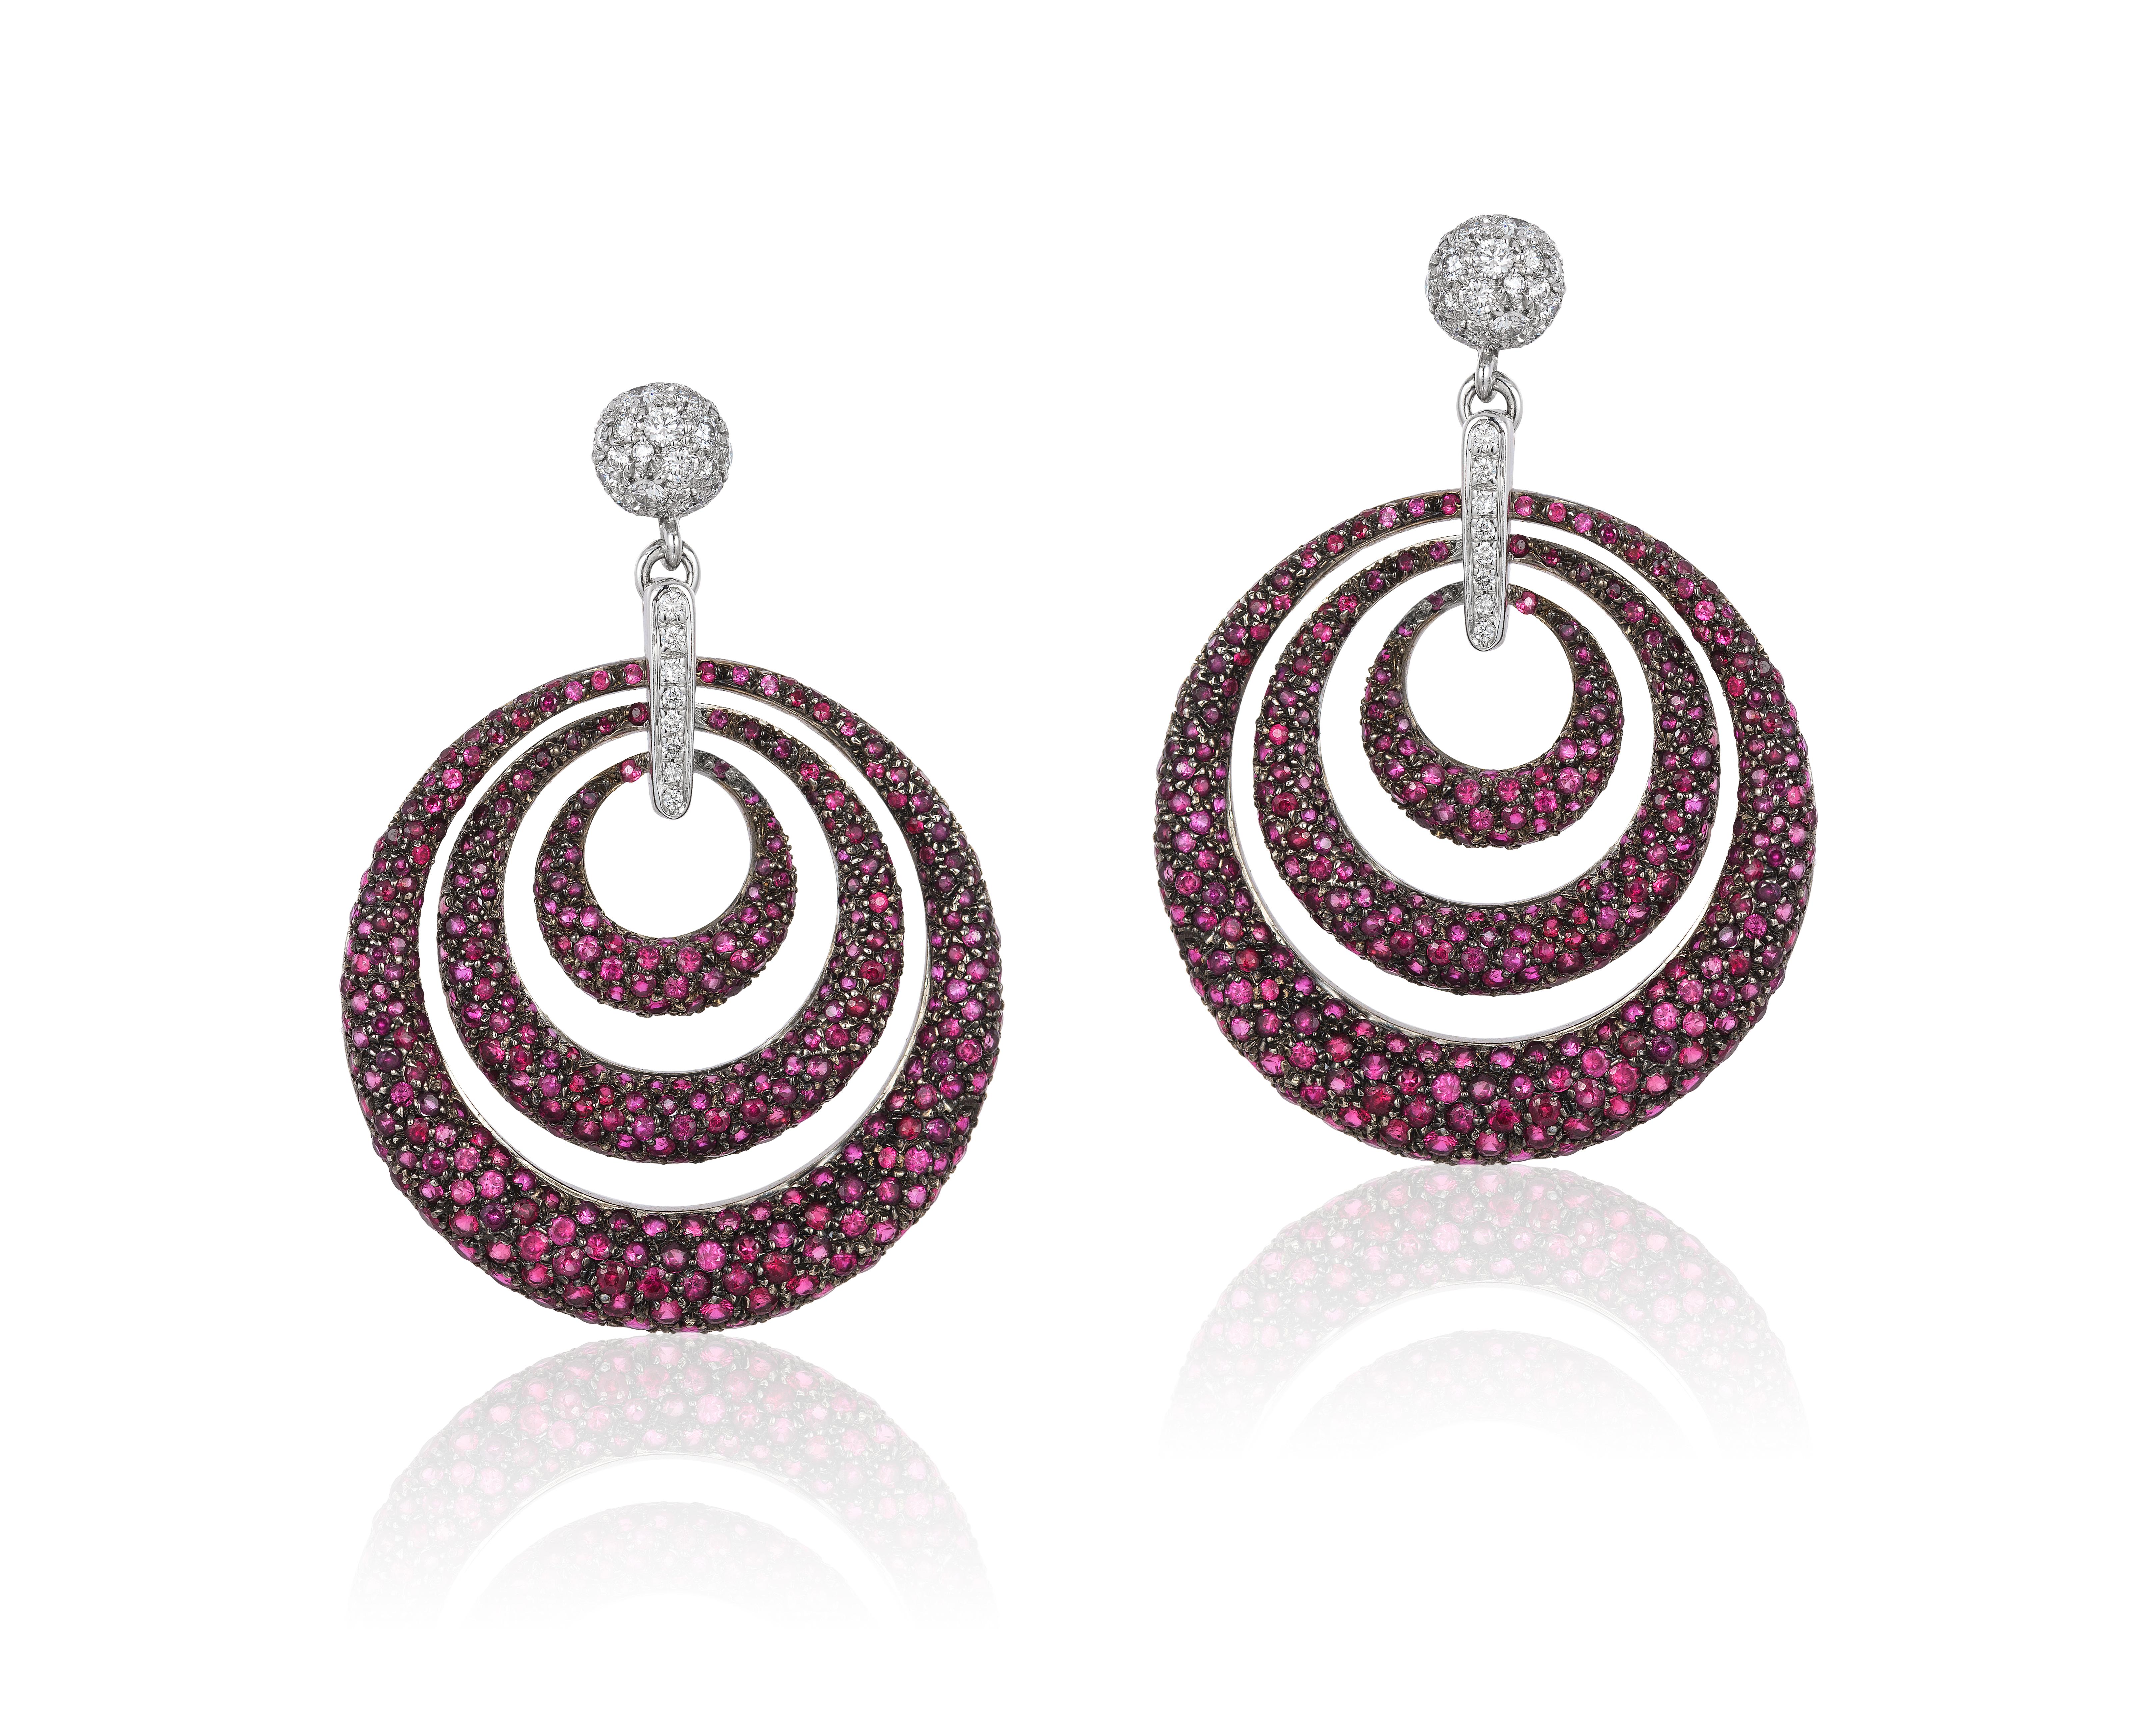 Andreoli Ruby Pave Diamond 18 Karat White Gold Blackened Rhodium Hoop Earrings. These earrings feature 1.31 carats of F-G-H Color VS-SI Clarity full round brilliant cut diamonds, 13.53 carats of round ruby pave, blackened rhodium, 40.80gm 18KT White